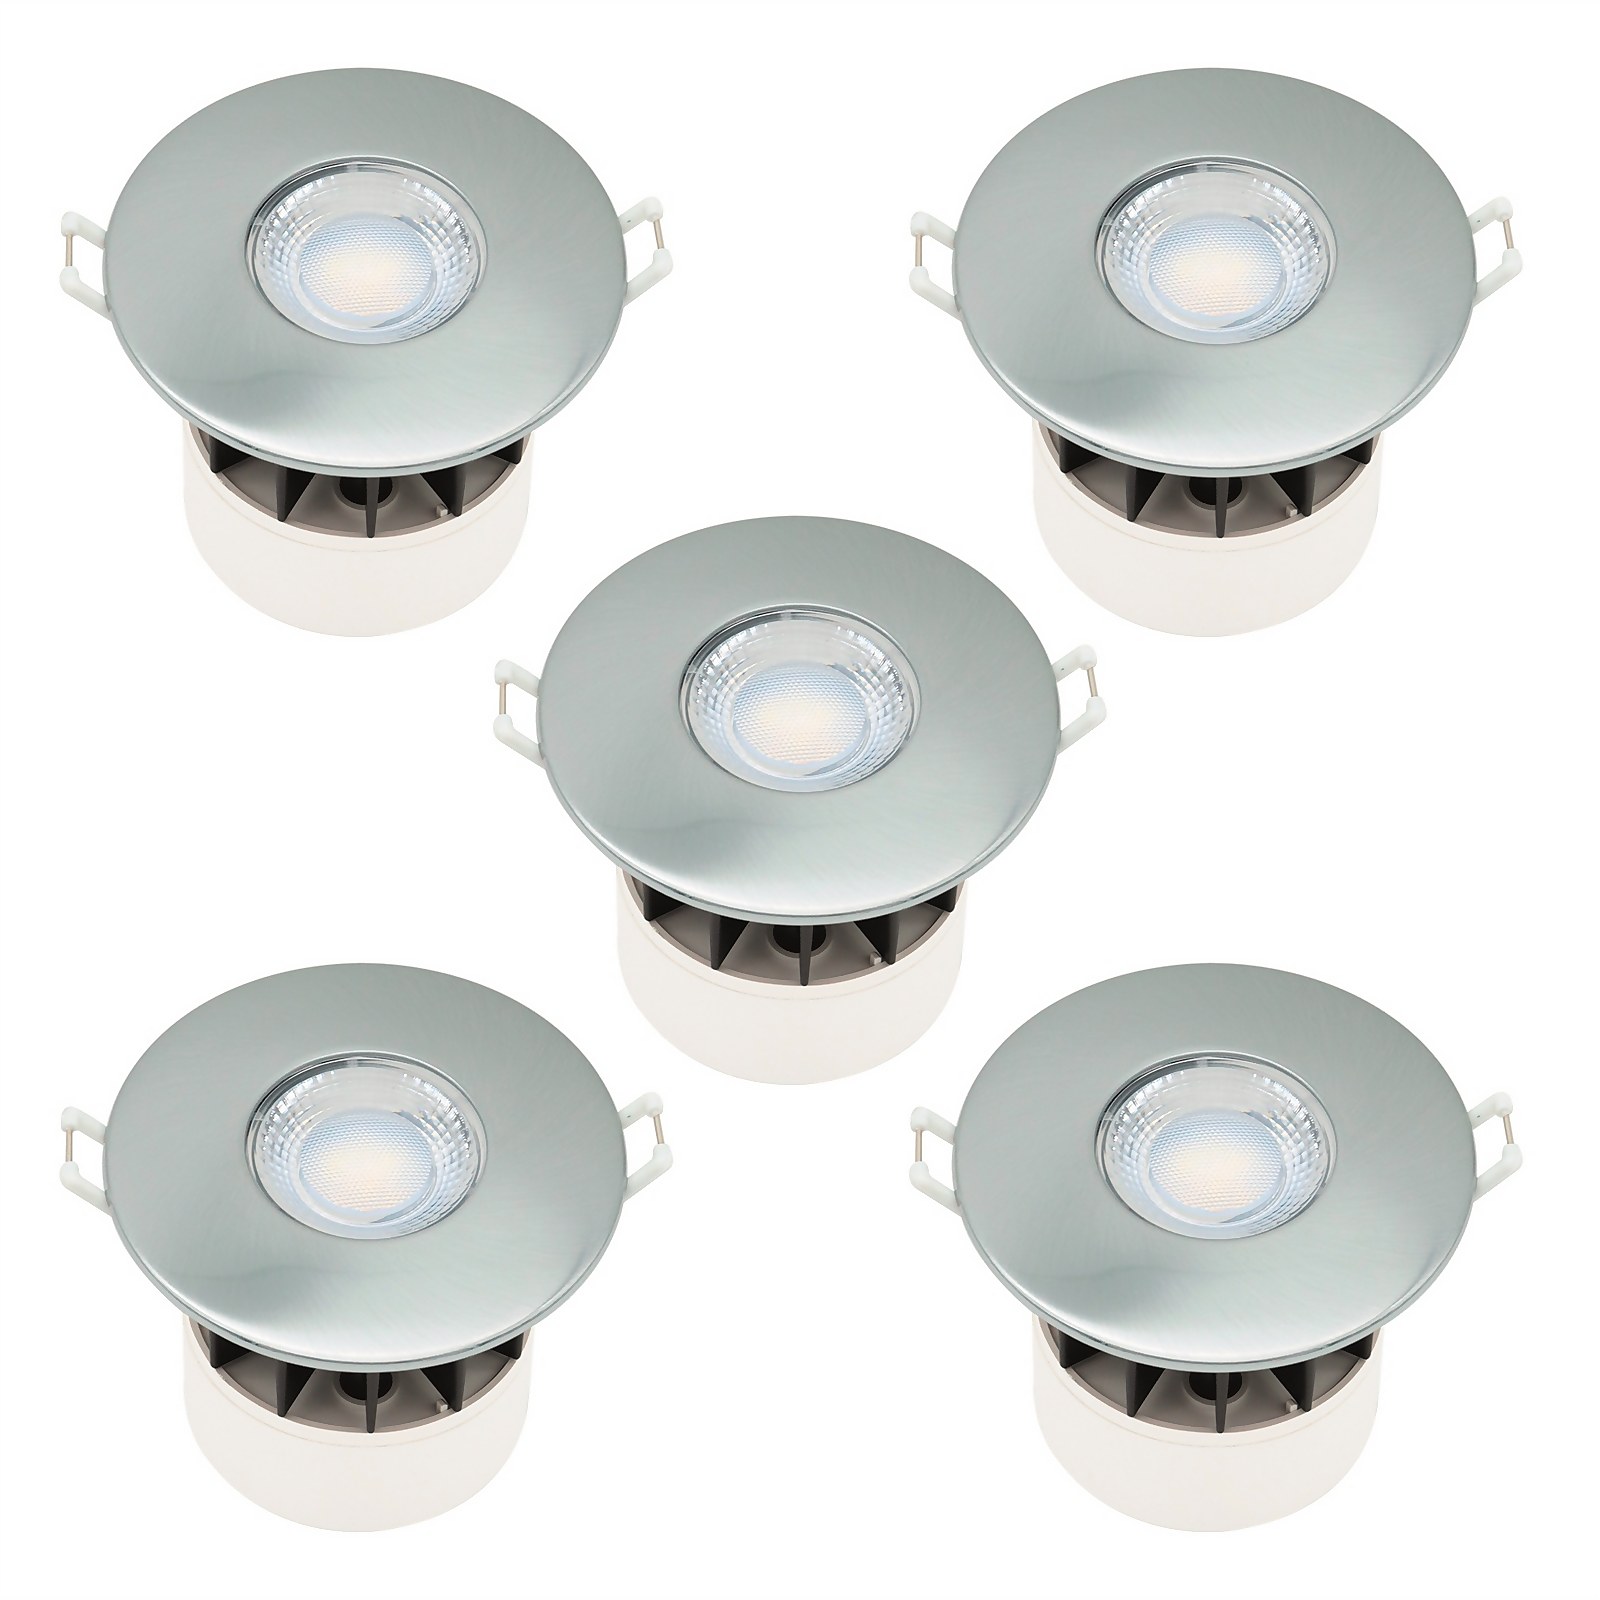 Photo of Fixed Fire Rated Ip65 Led 5 Pack Downlight - Brushed Nickel